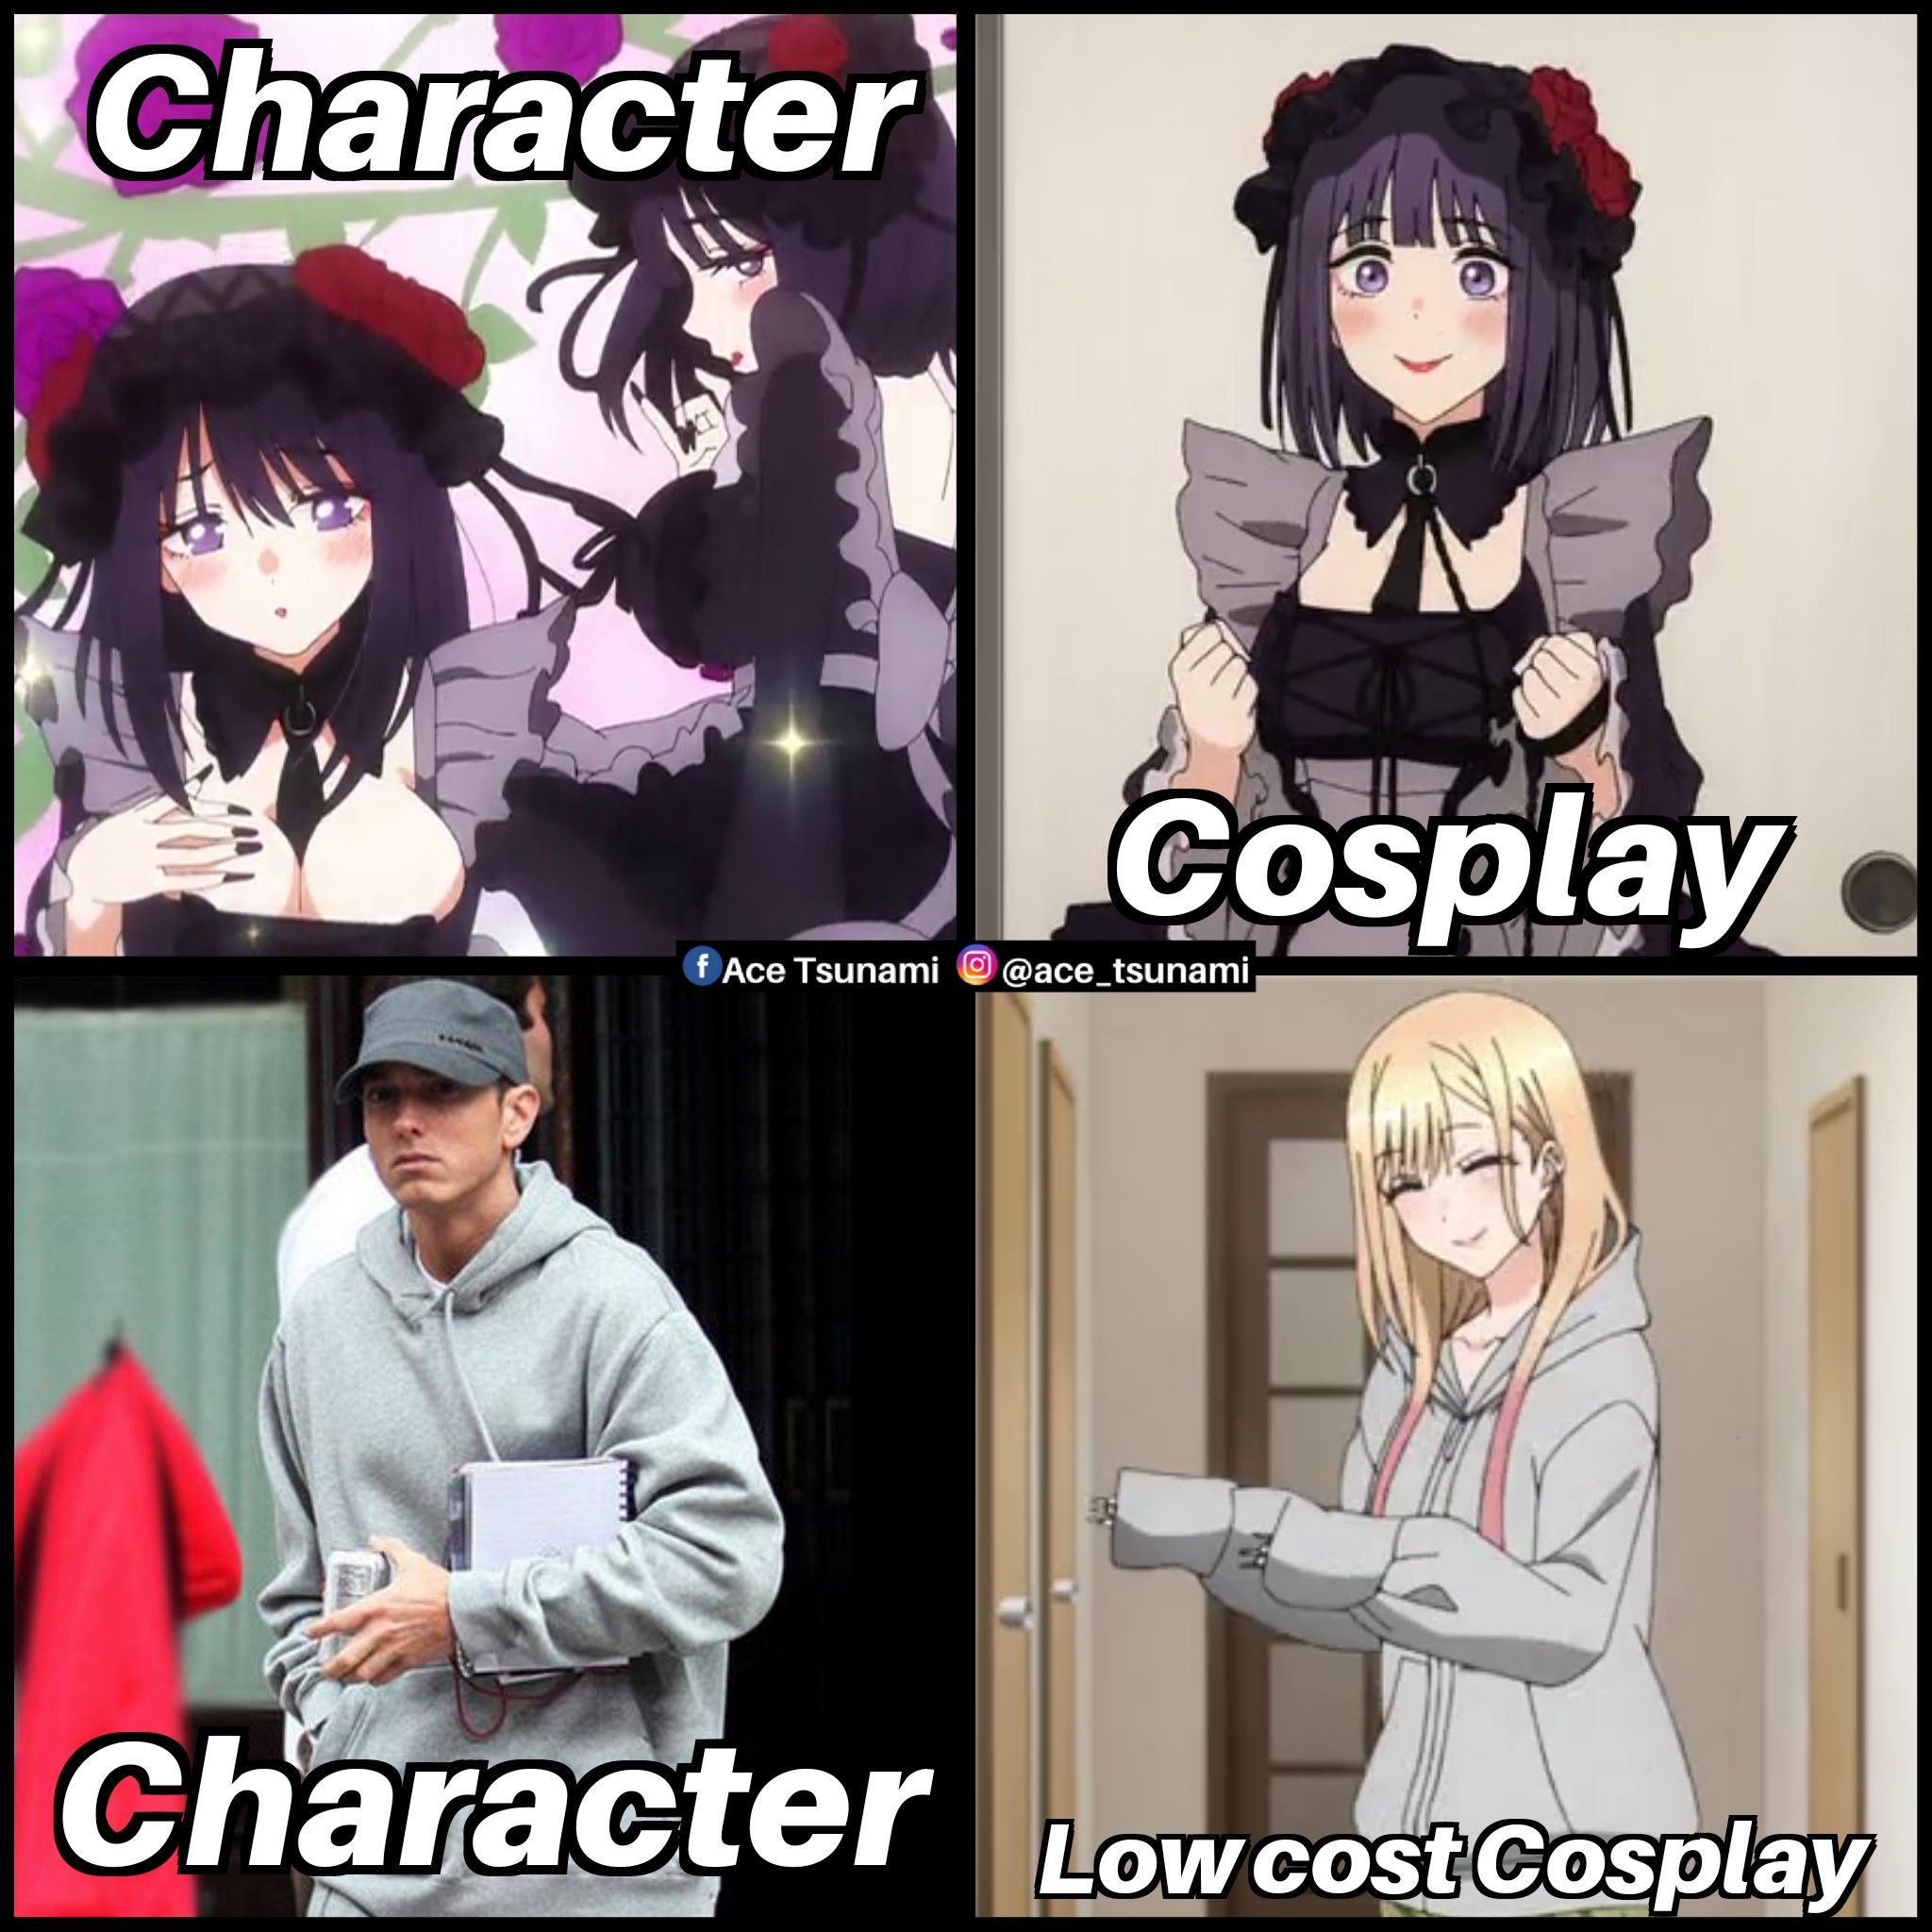 So she cosplays at home too